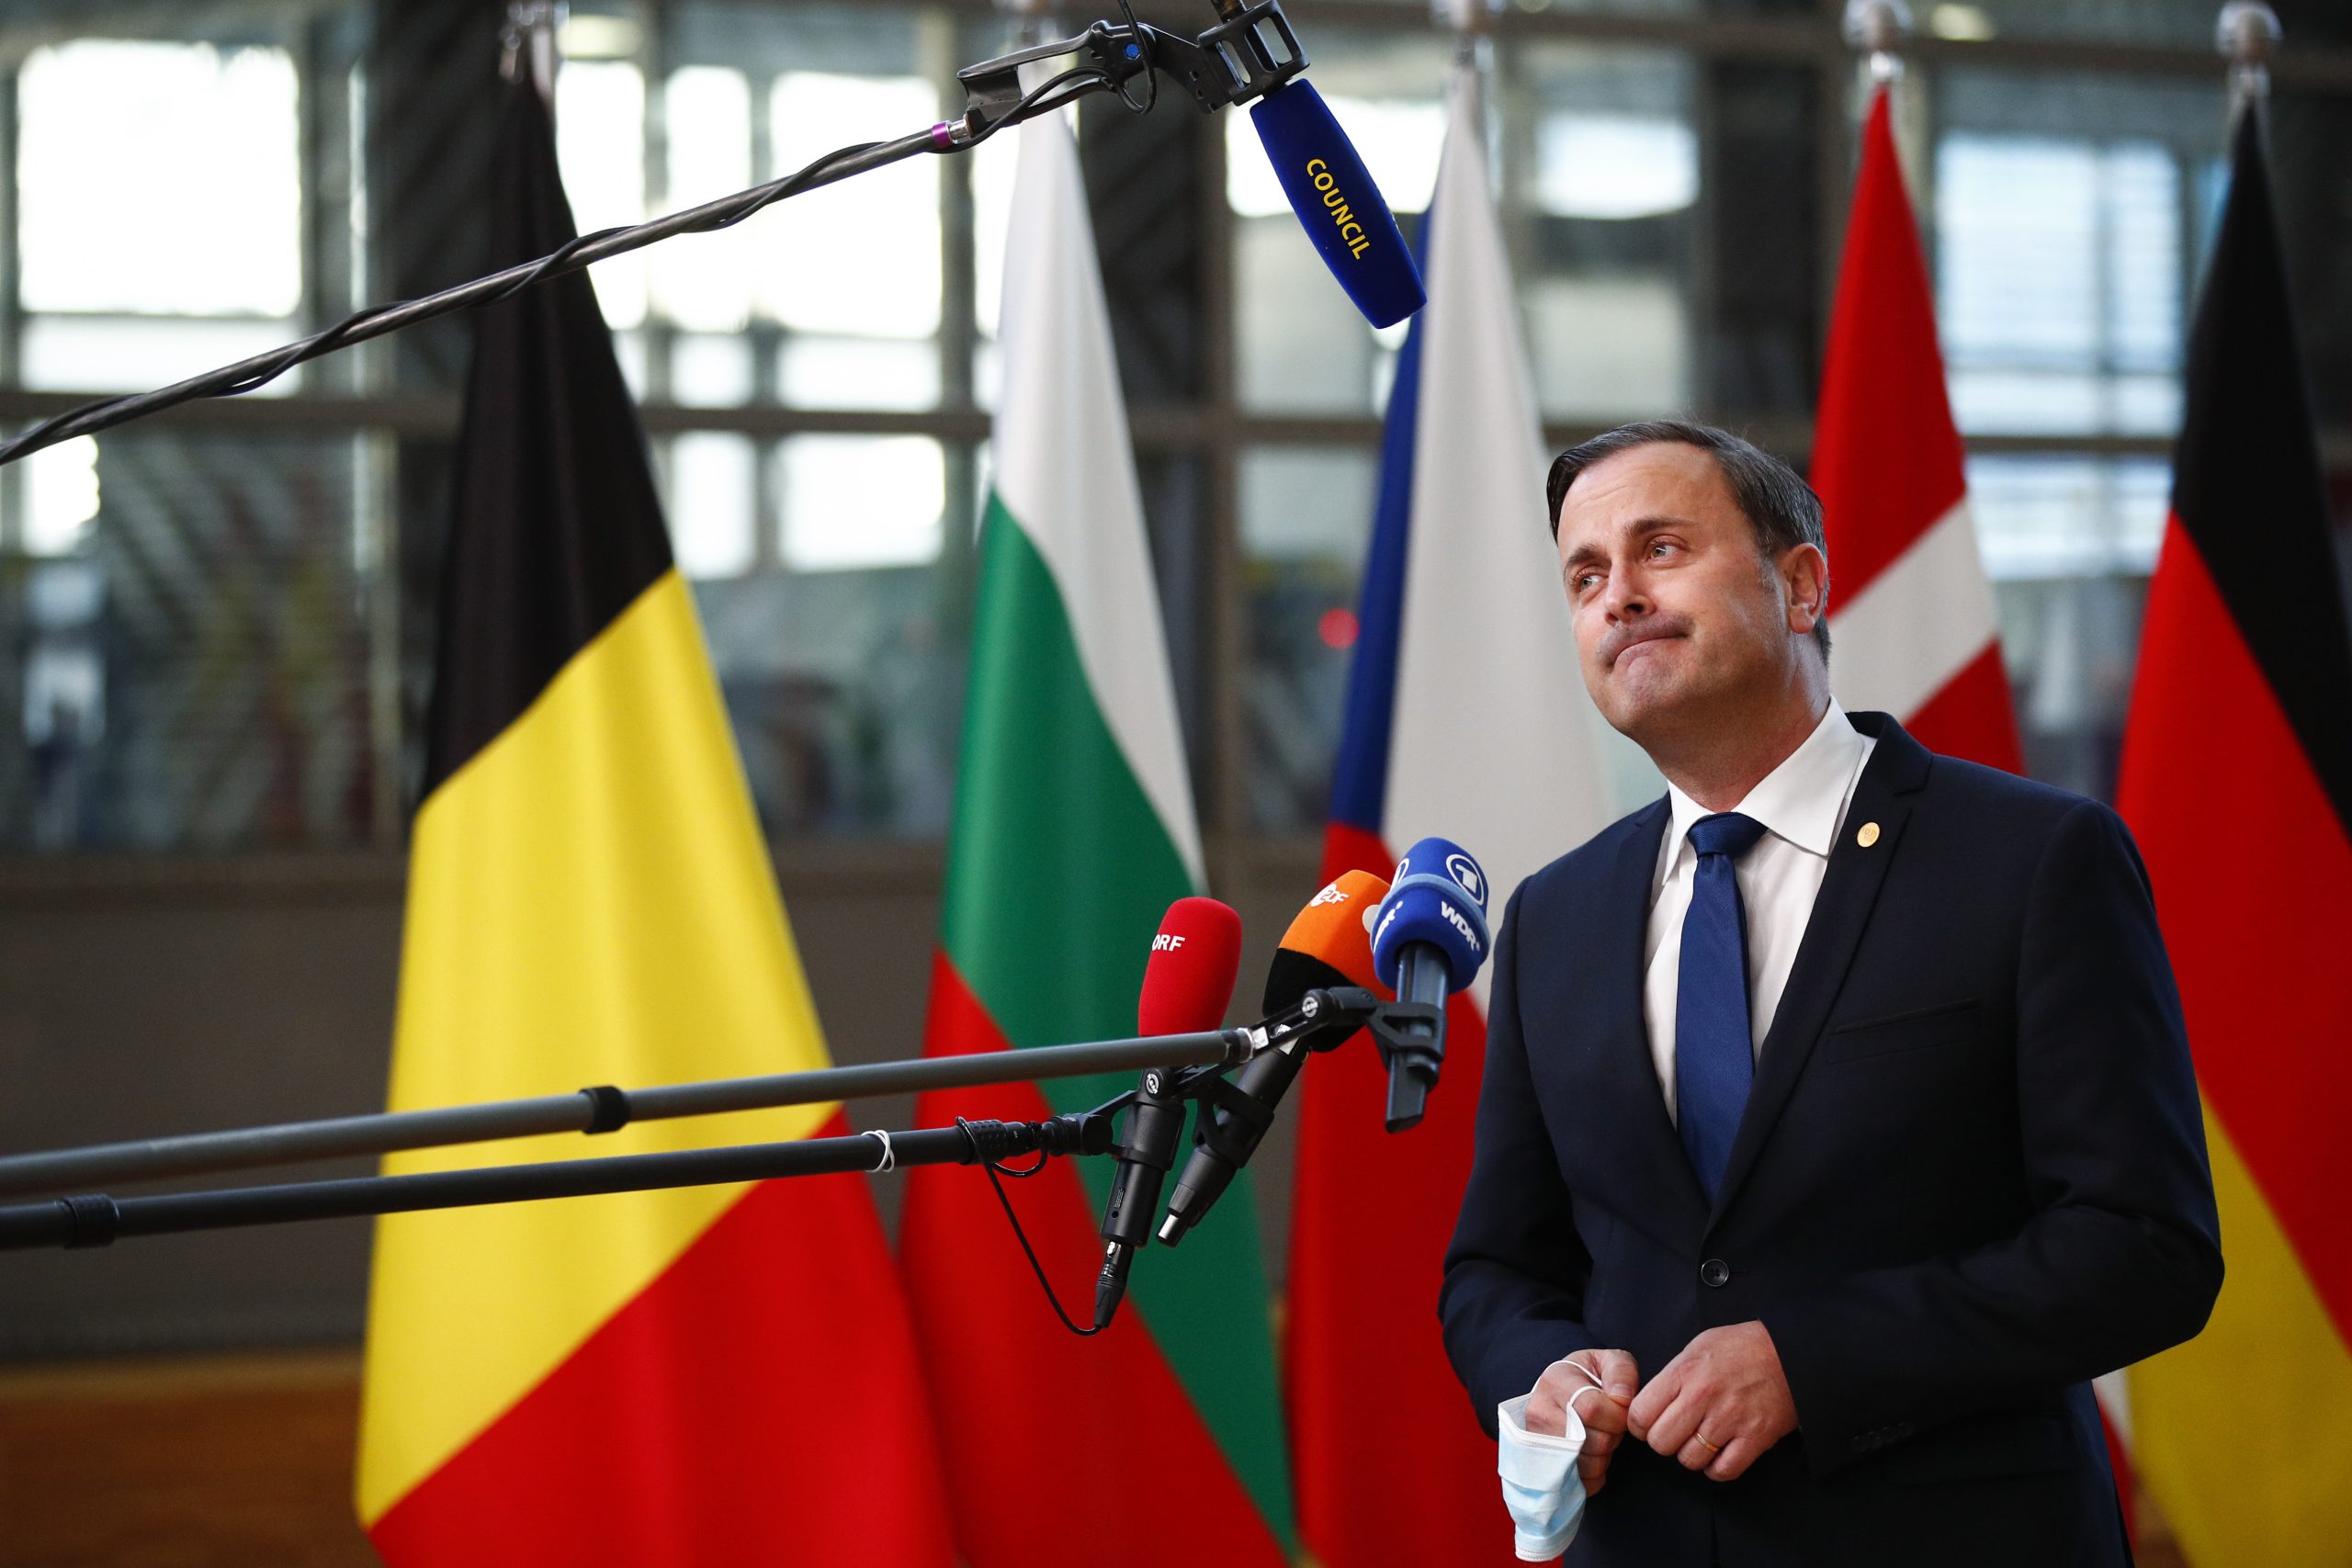 epa09538431 Luxembourg's Prime Minister Xavier Bettel attends a face-to-face European Union leaders summit in Brussels, Belgium, 22 October 2021. EU leaders meet in Brussels on 21 and 22 October, to discuss COVID-19, digital transformation, energy prices, migration, trade and external relations.  EPA/JOHANNA GERON / POOL